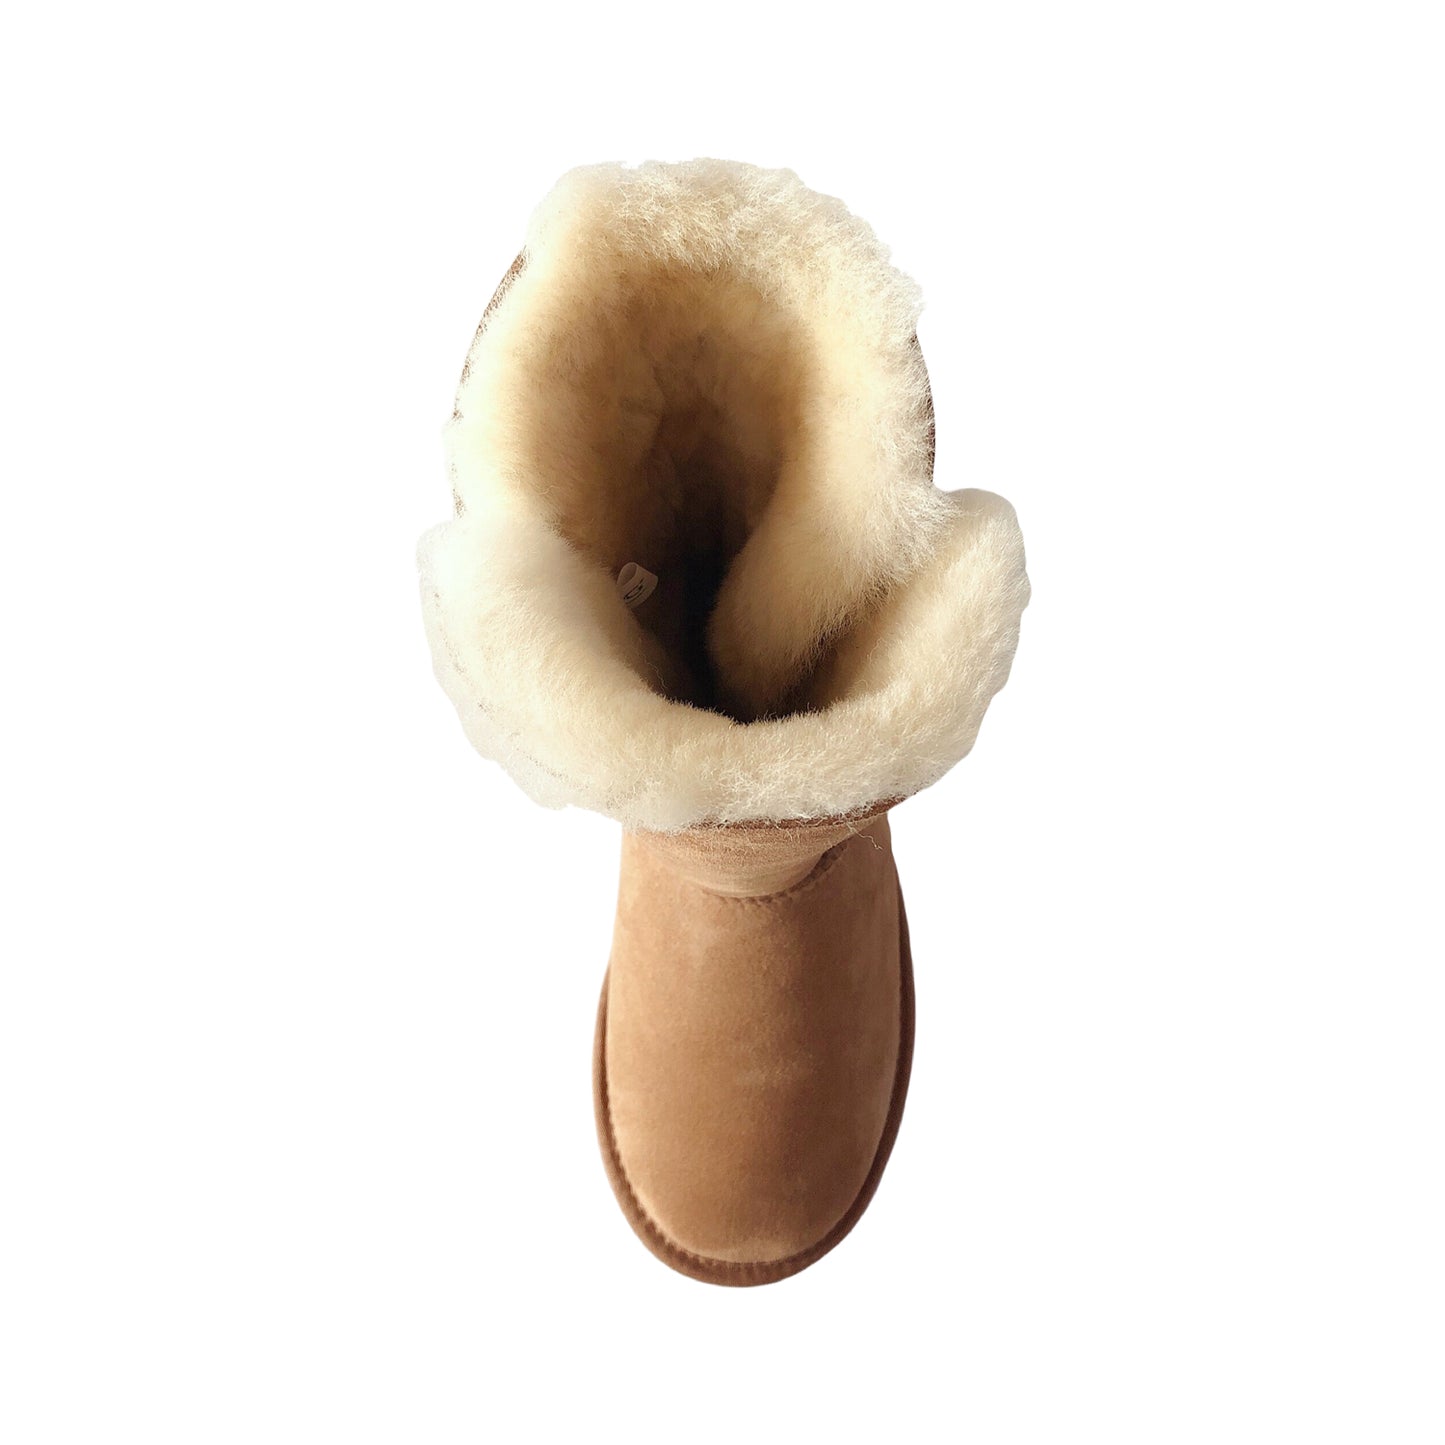 UGG Short Classic Button Boots